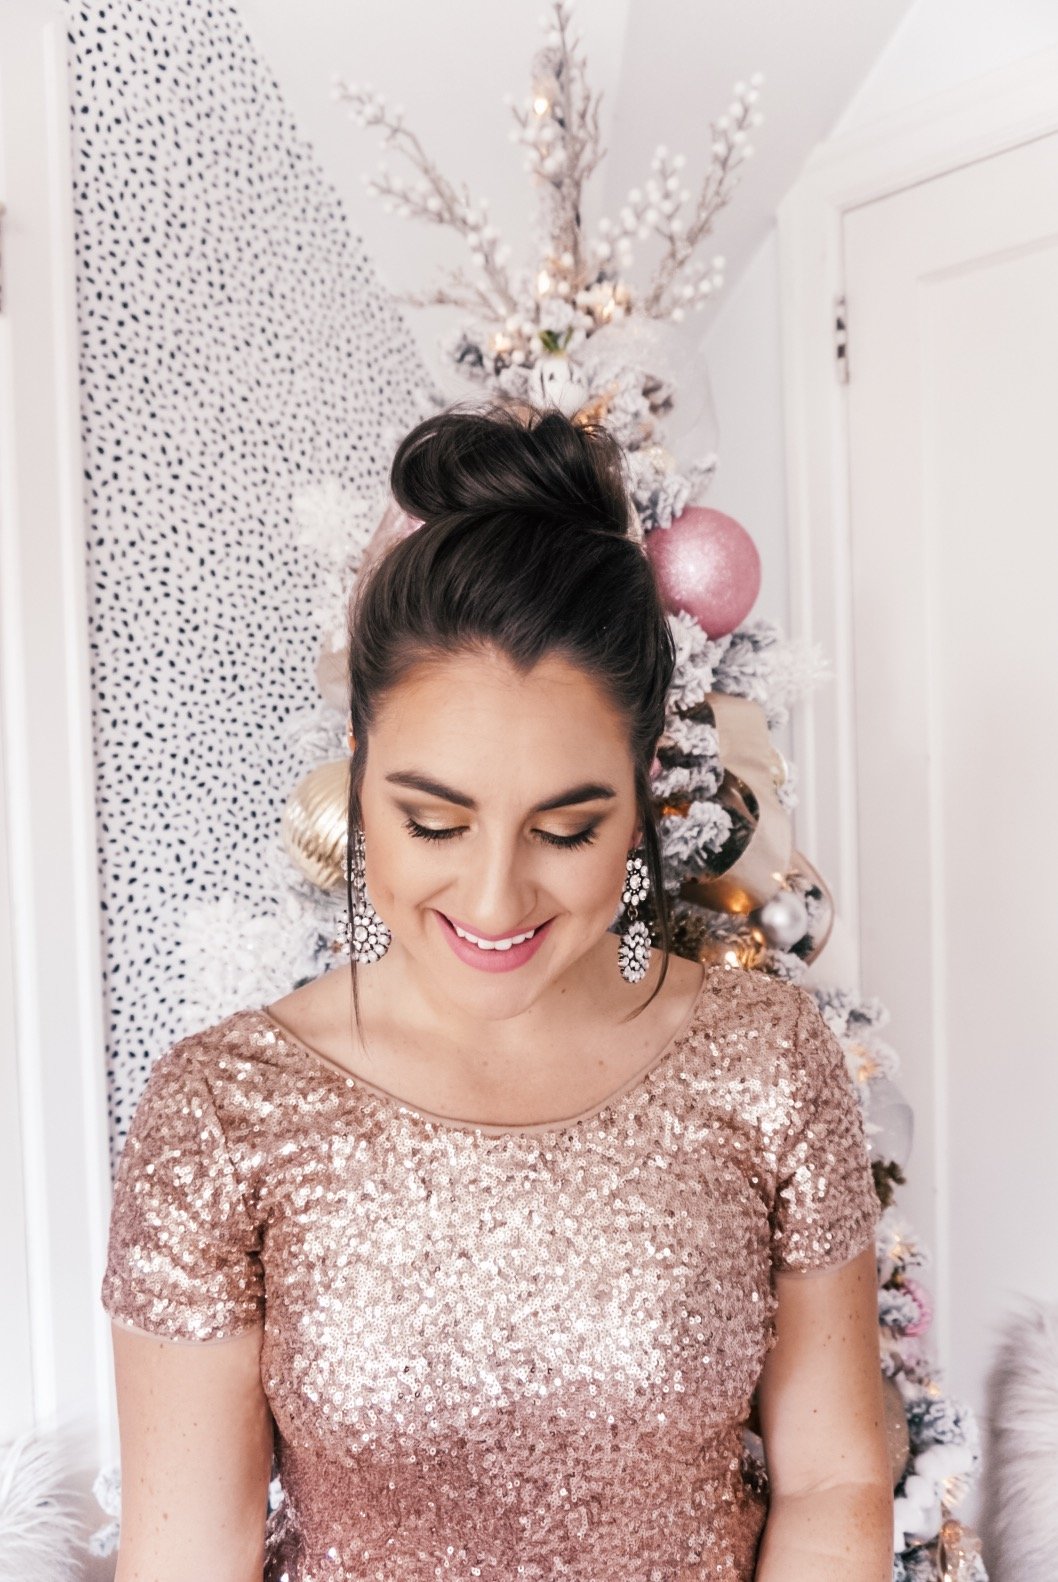 SAVE this post ASAP! The best ever holiday hair ideas from Portland Style Blogger Topknots and Pearls.